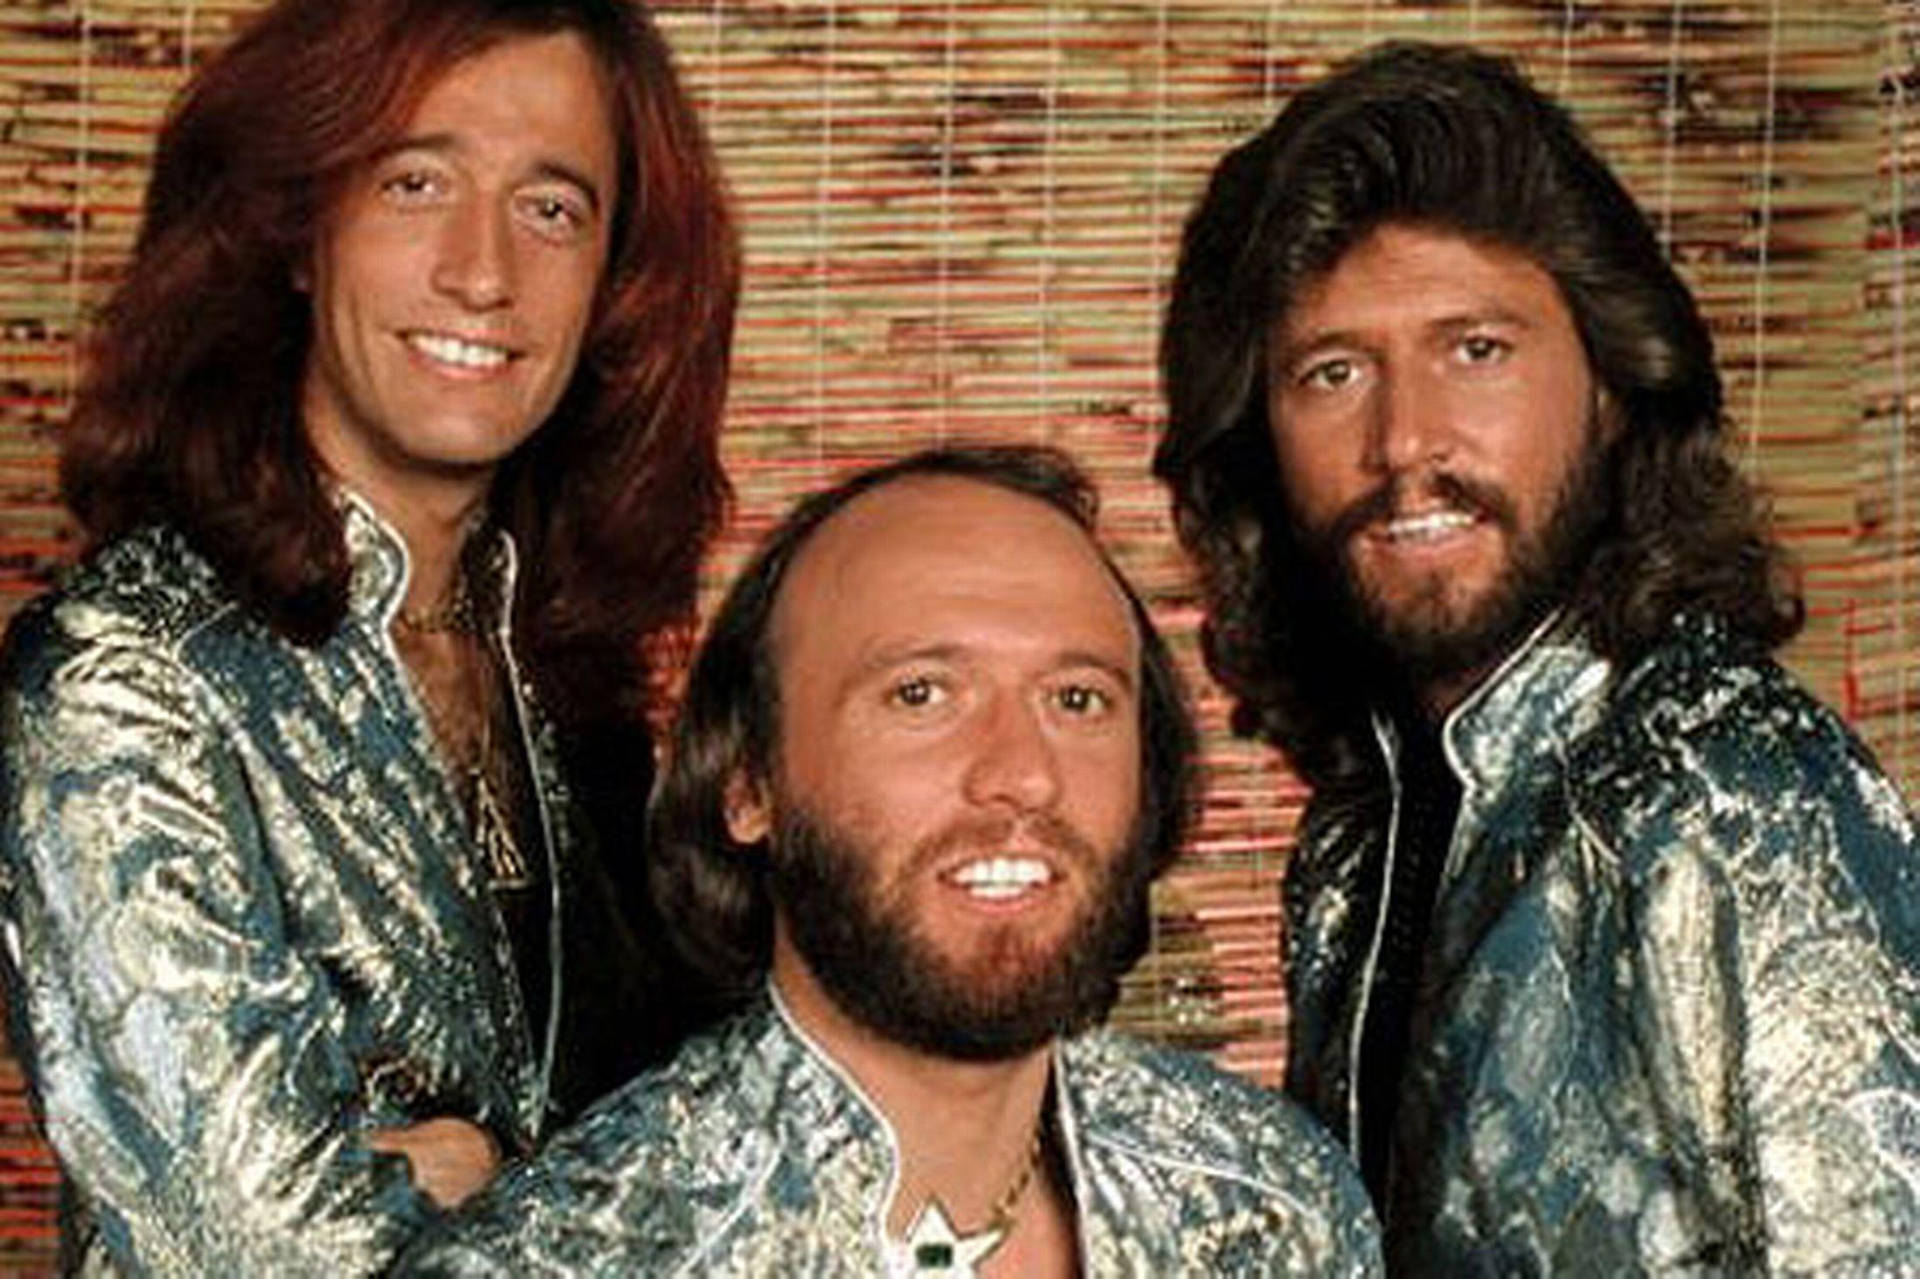 Bee Gees Pictures